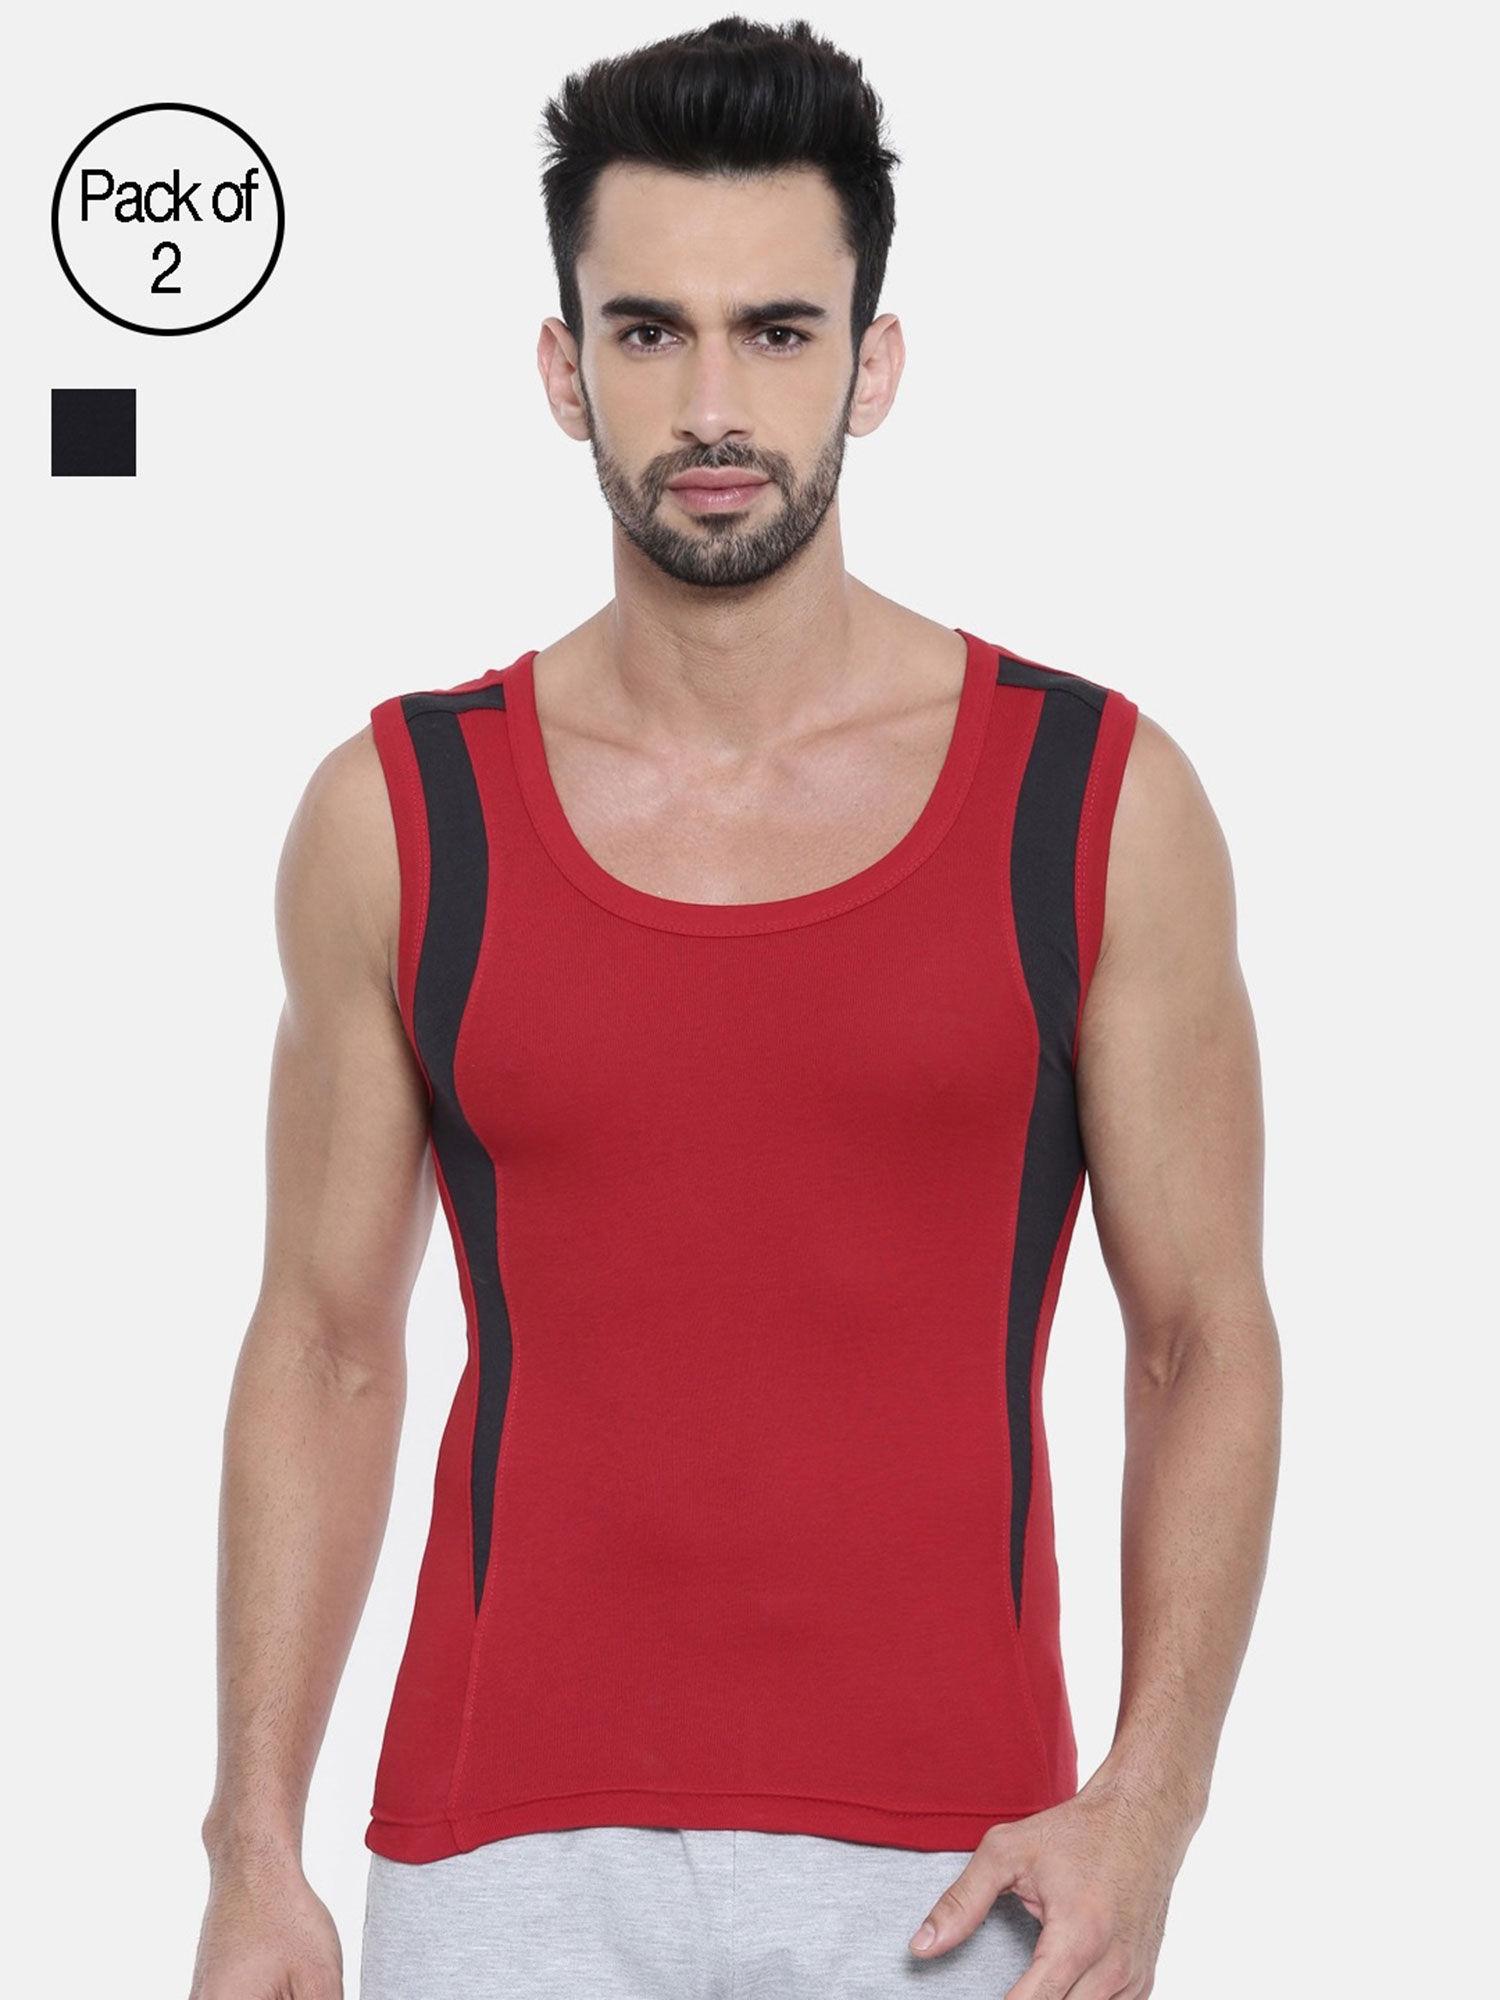 mens trendy fashion vest body fit solid innerwear (pack of 2)